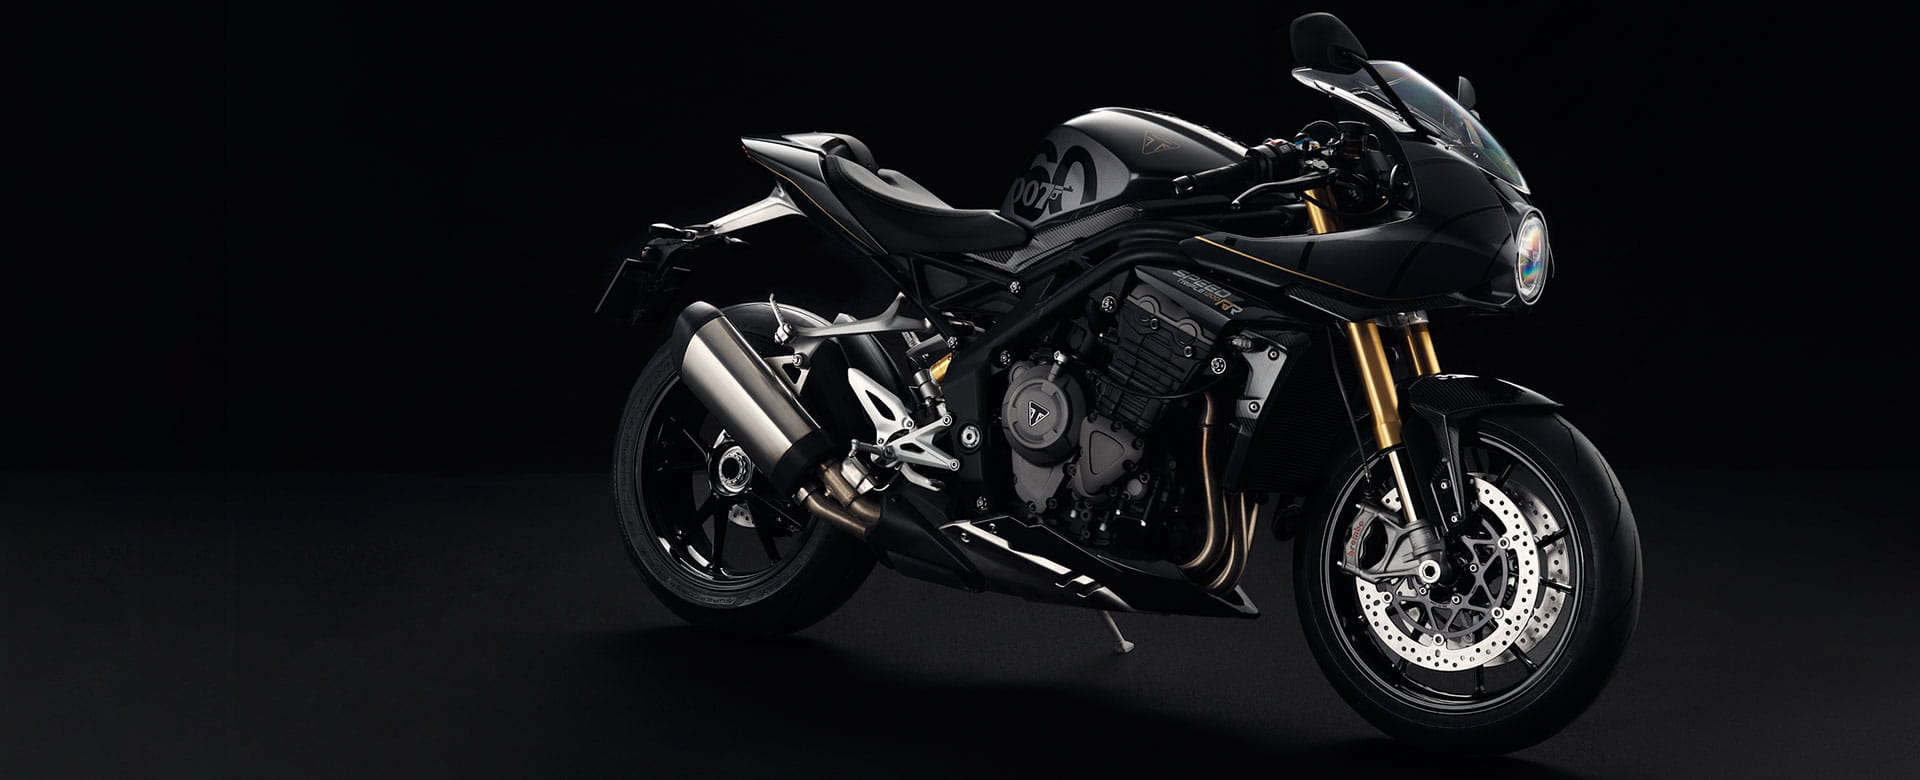 Speed Triple 1200 RR Bond Edition | For the Ride